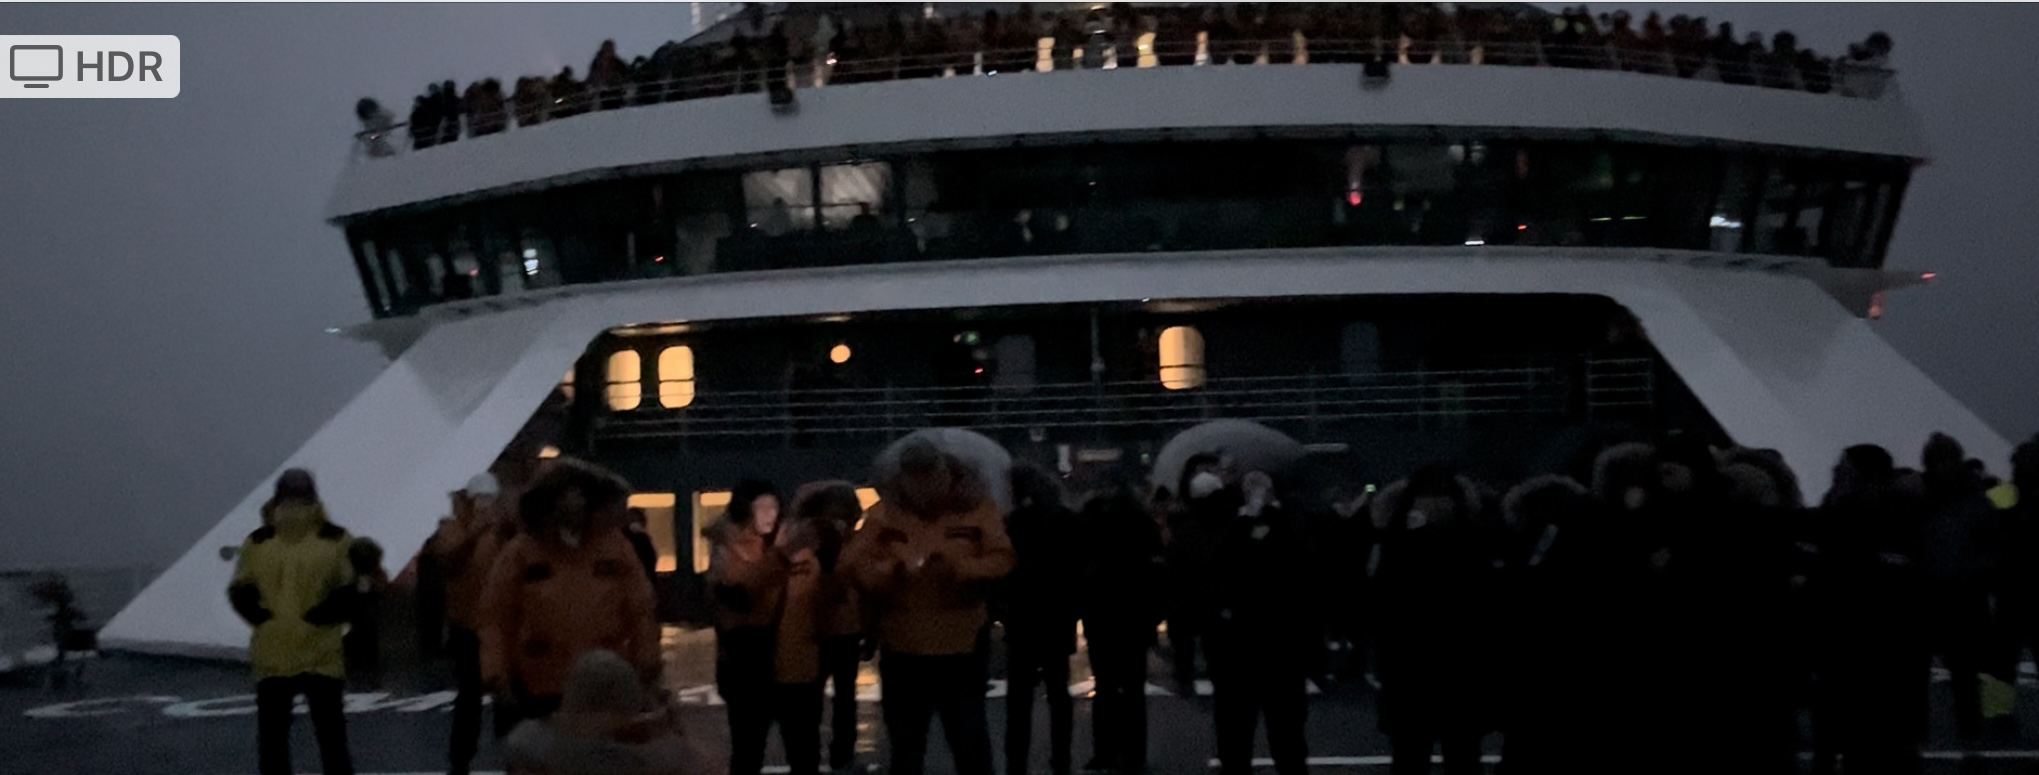 a dark image of a ship with people standing out on the deck and thick gray clouds above.